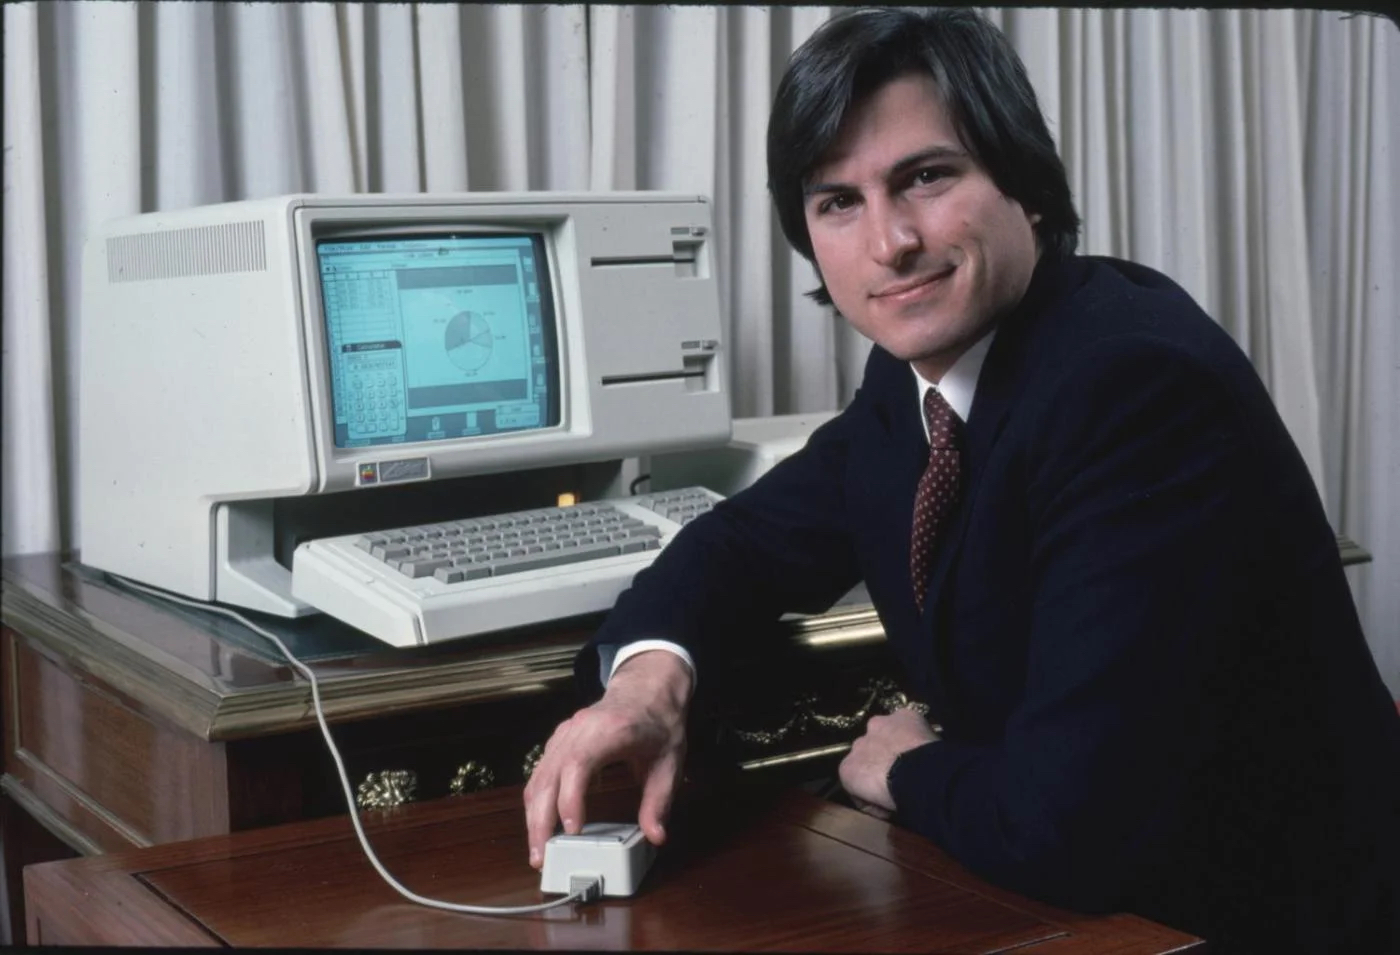 This video shows what it’s like using an Apple Lisa from 1983 in 2023